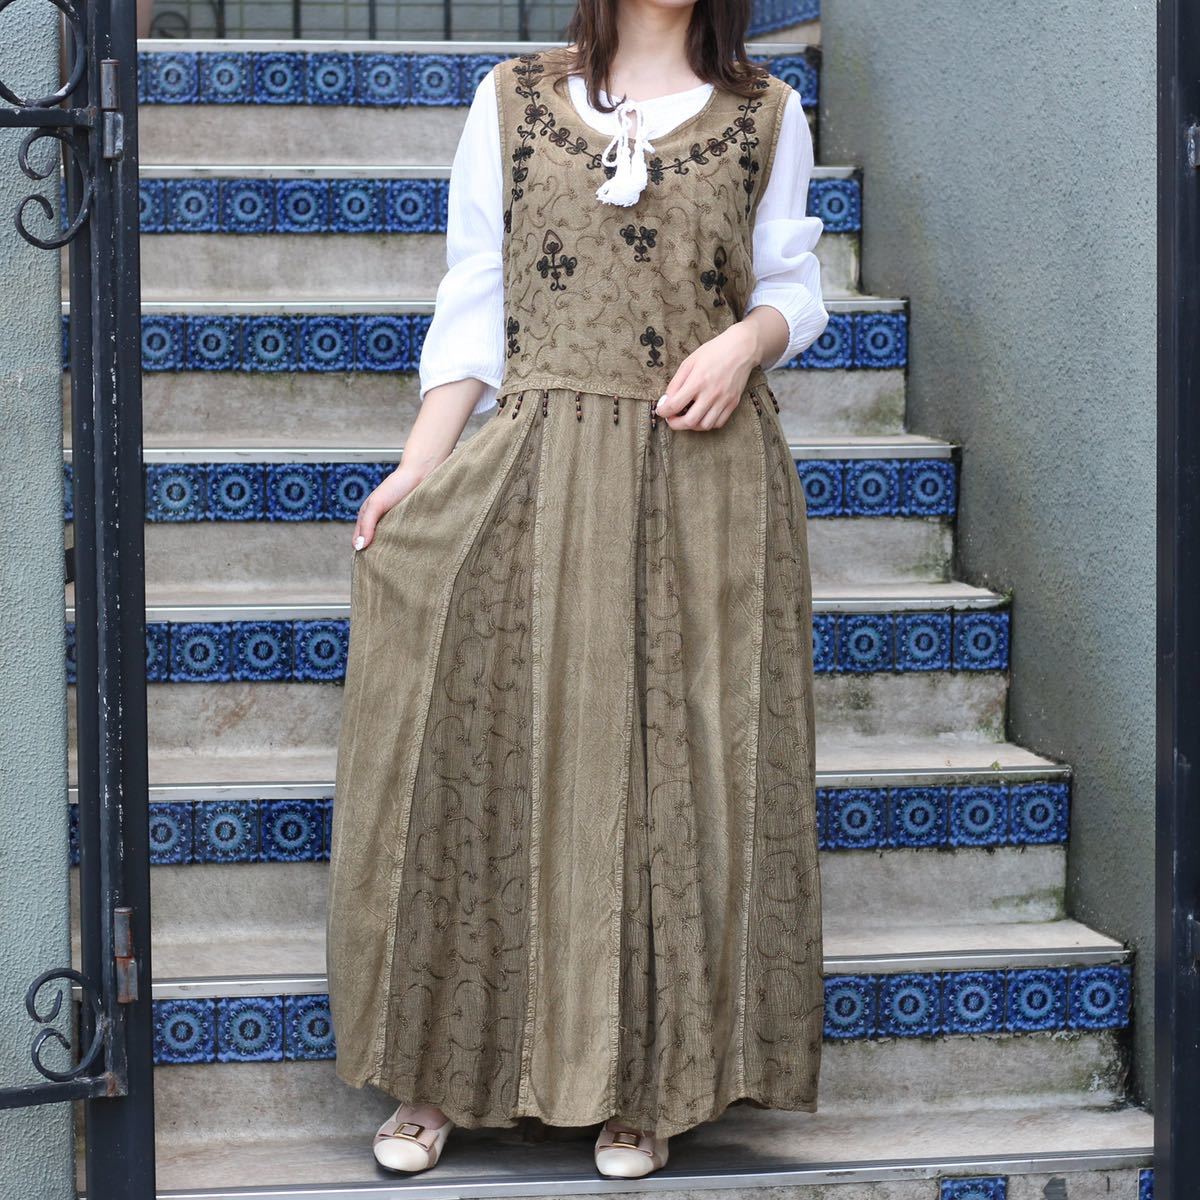 USA VINTAGE EMBROIDERY LAYARD DESIGN NO SLEEVE DRESS ONE PIECE/アメリカ古着刺繍レイヤードデザインノースリーブワンピース